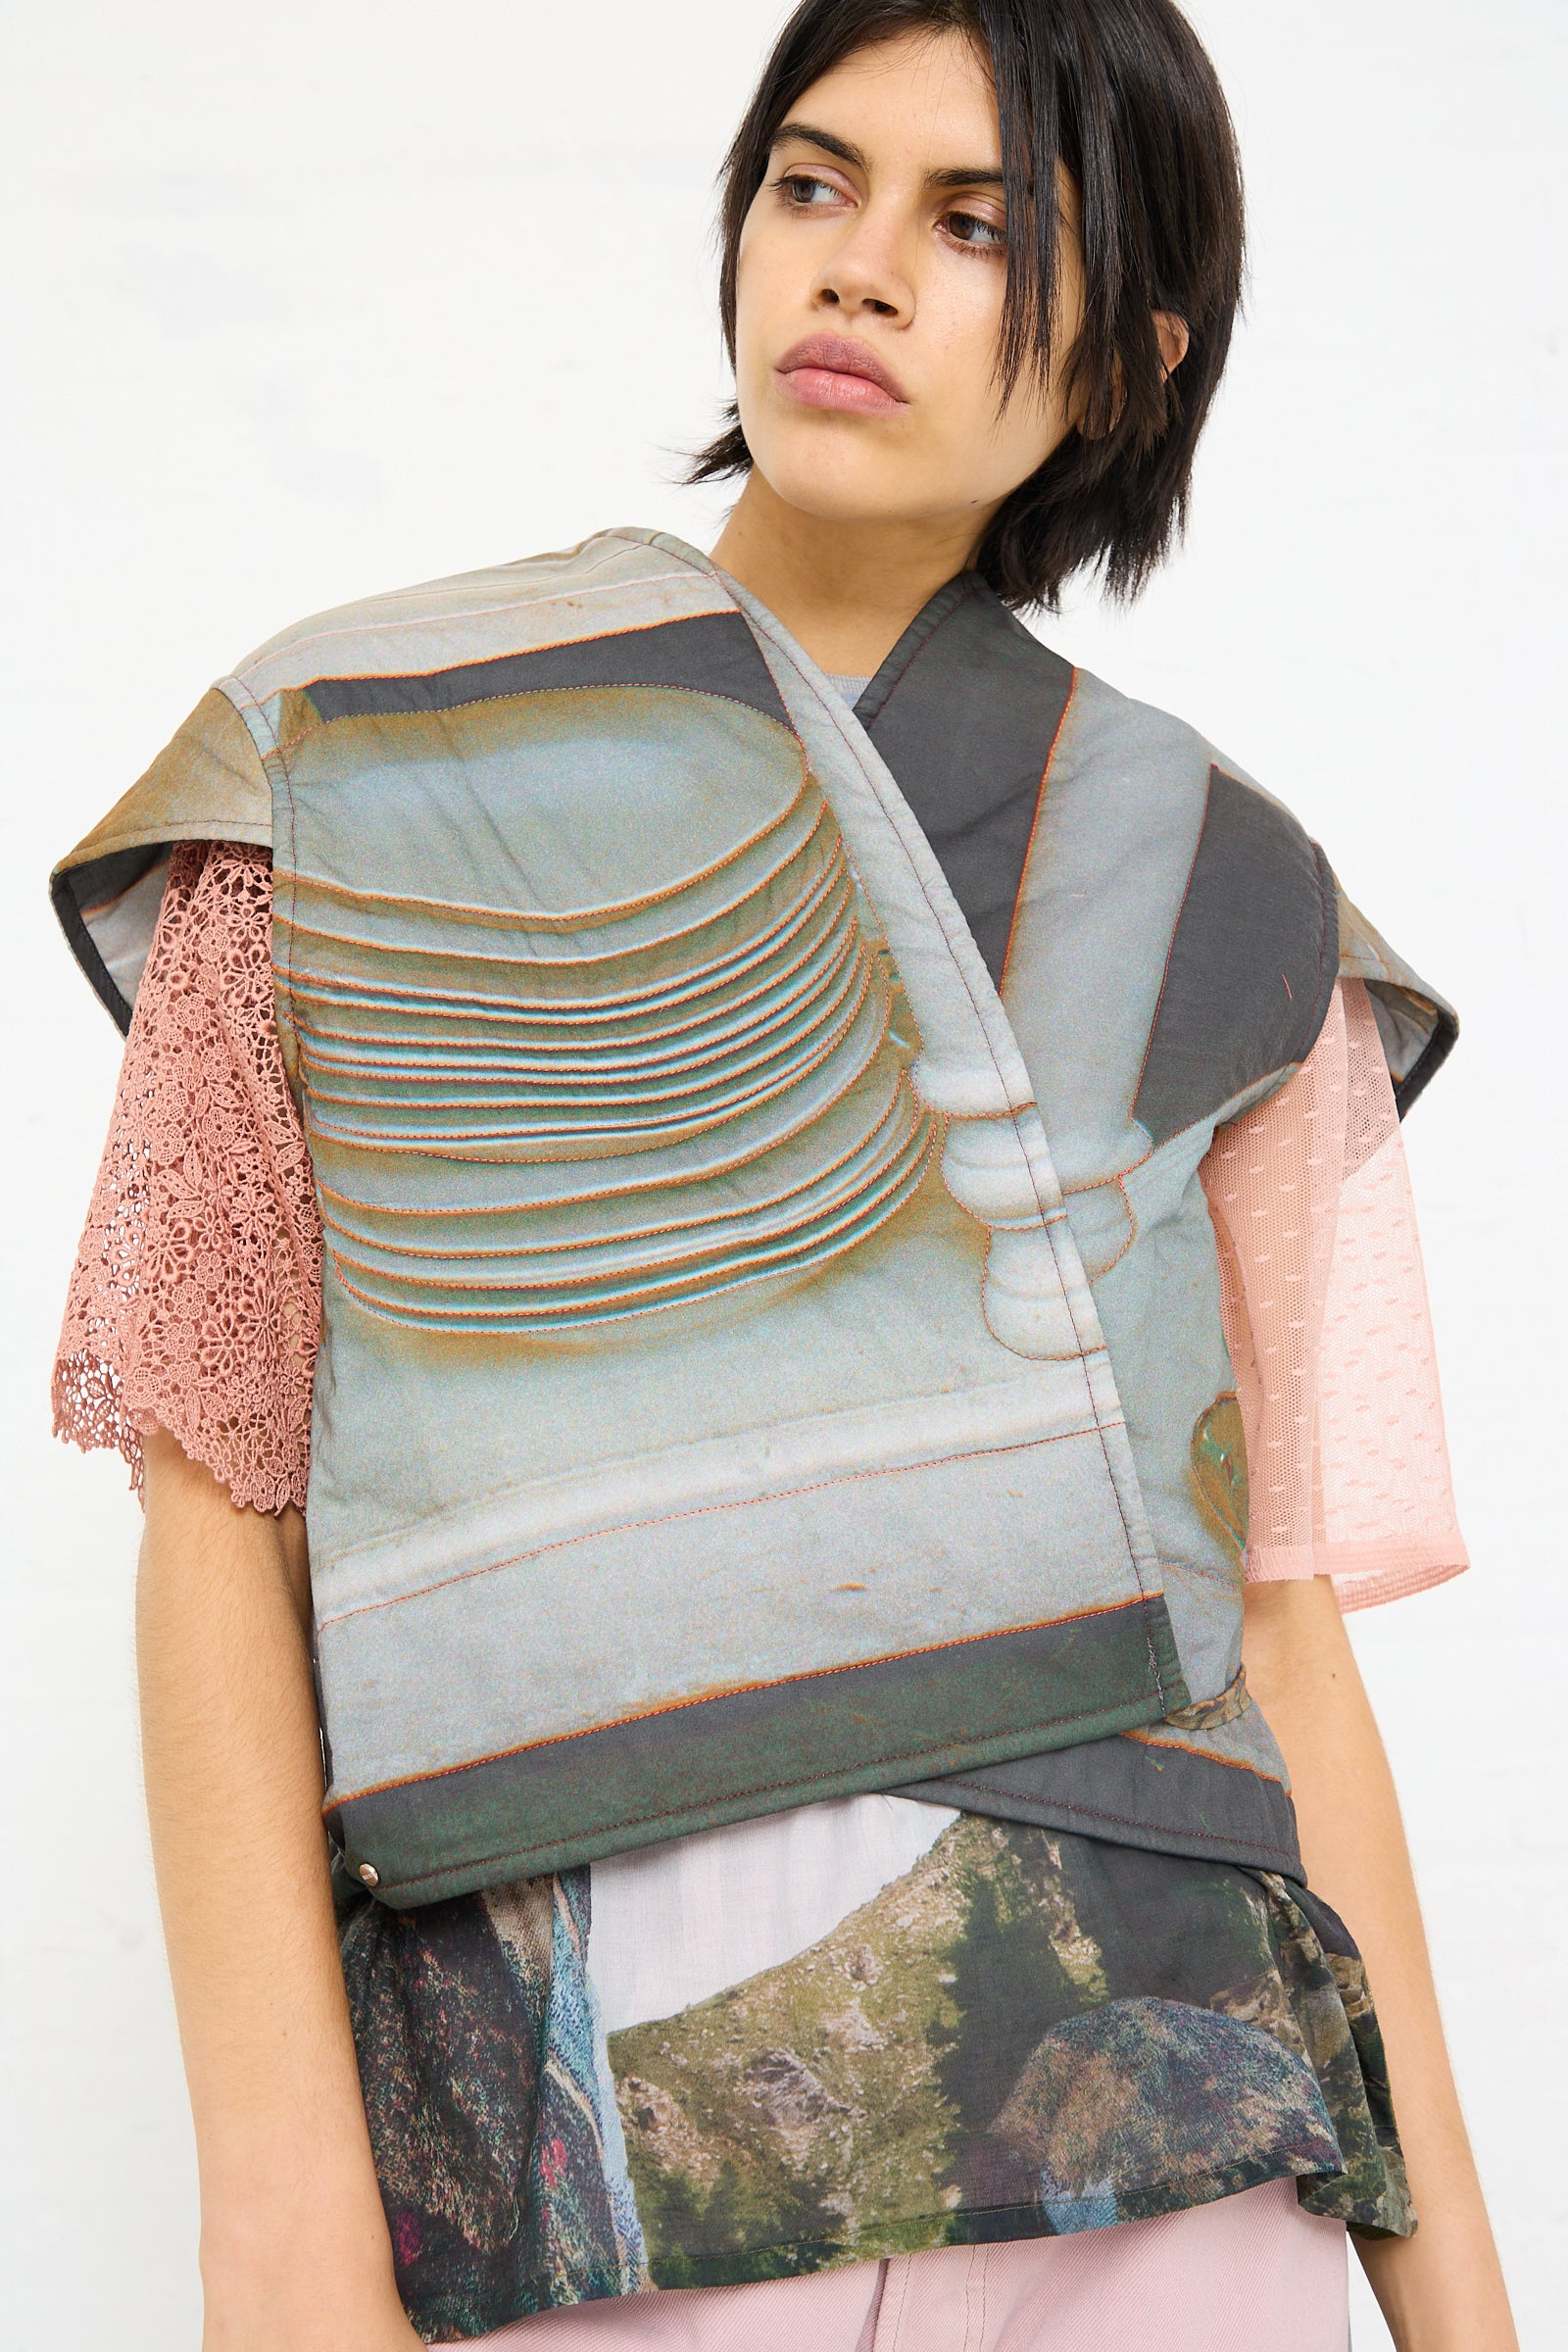 A person wearing an avant-garde, multilayered and textured outfit, highlighted by an oversized Cotton No. 77 Summer Living vest in print from the Bless luxury brand, with a contemplative expression.